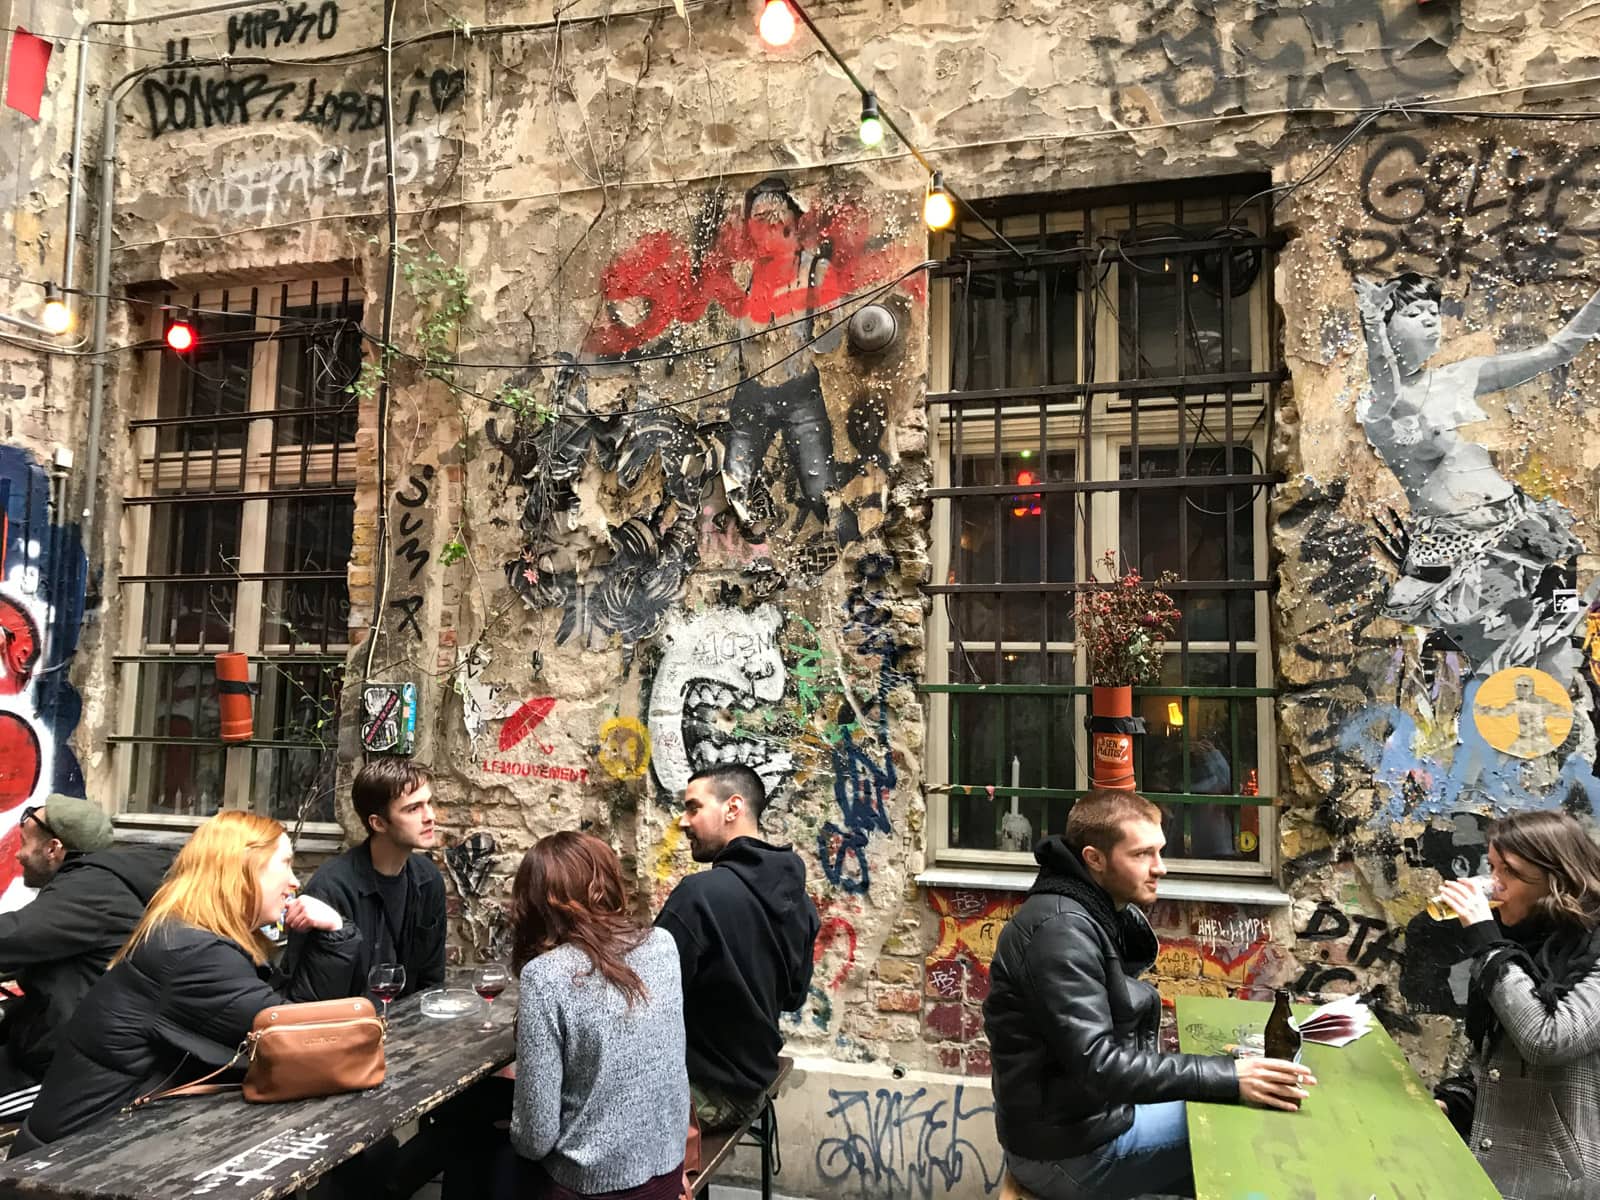 Some people sitting at tables in a courtyard, behind them a building covered in graffiti.